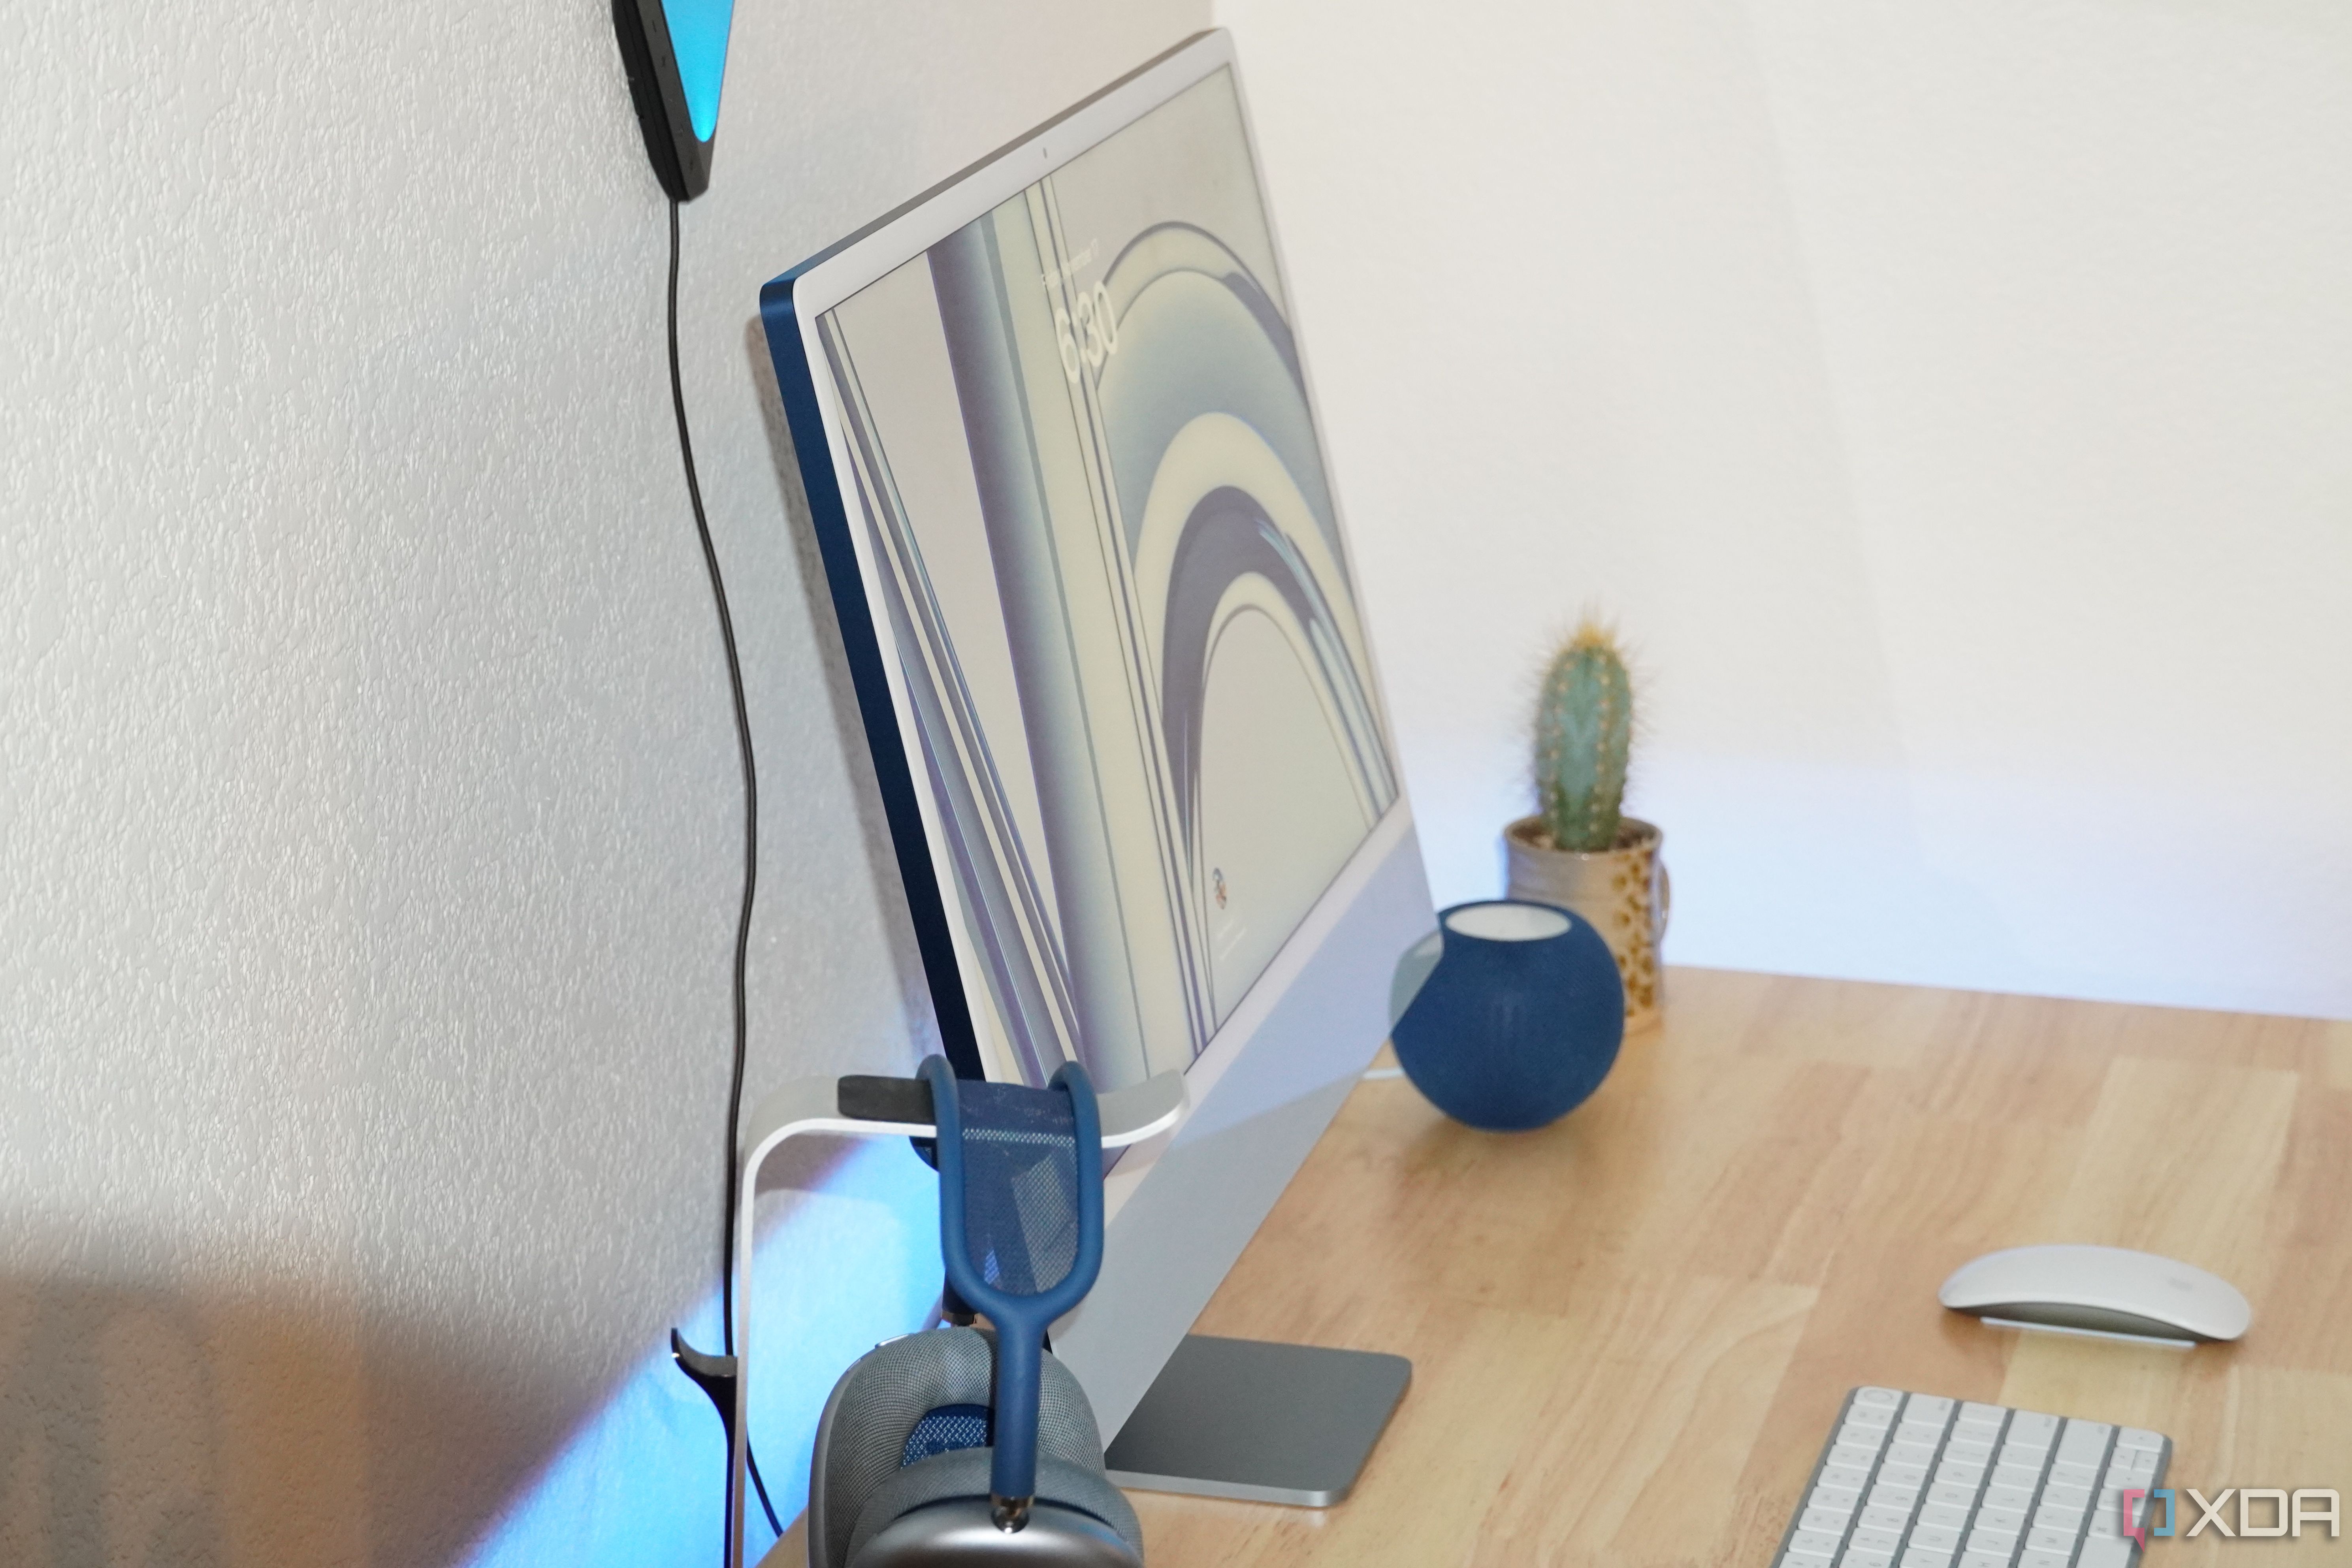 An iMac setup from the side view.